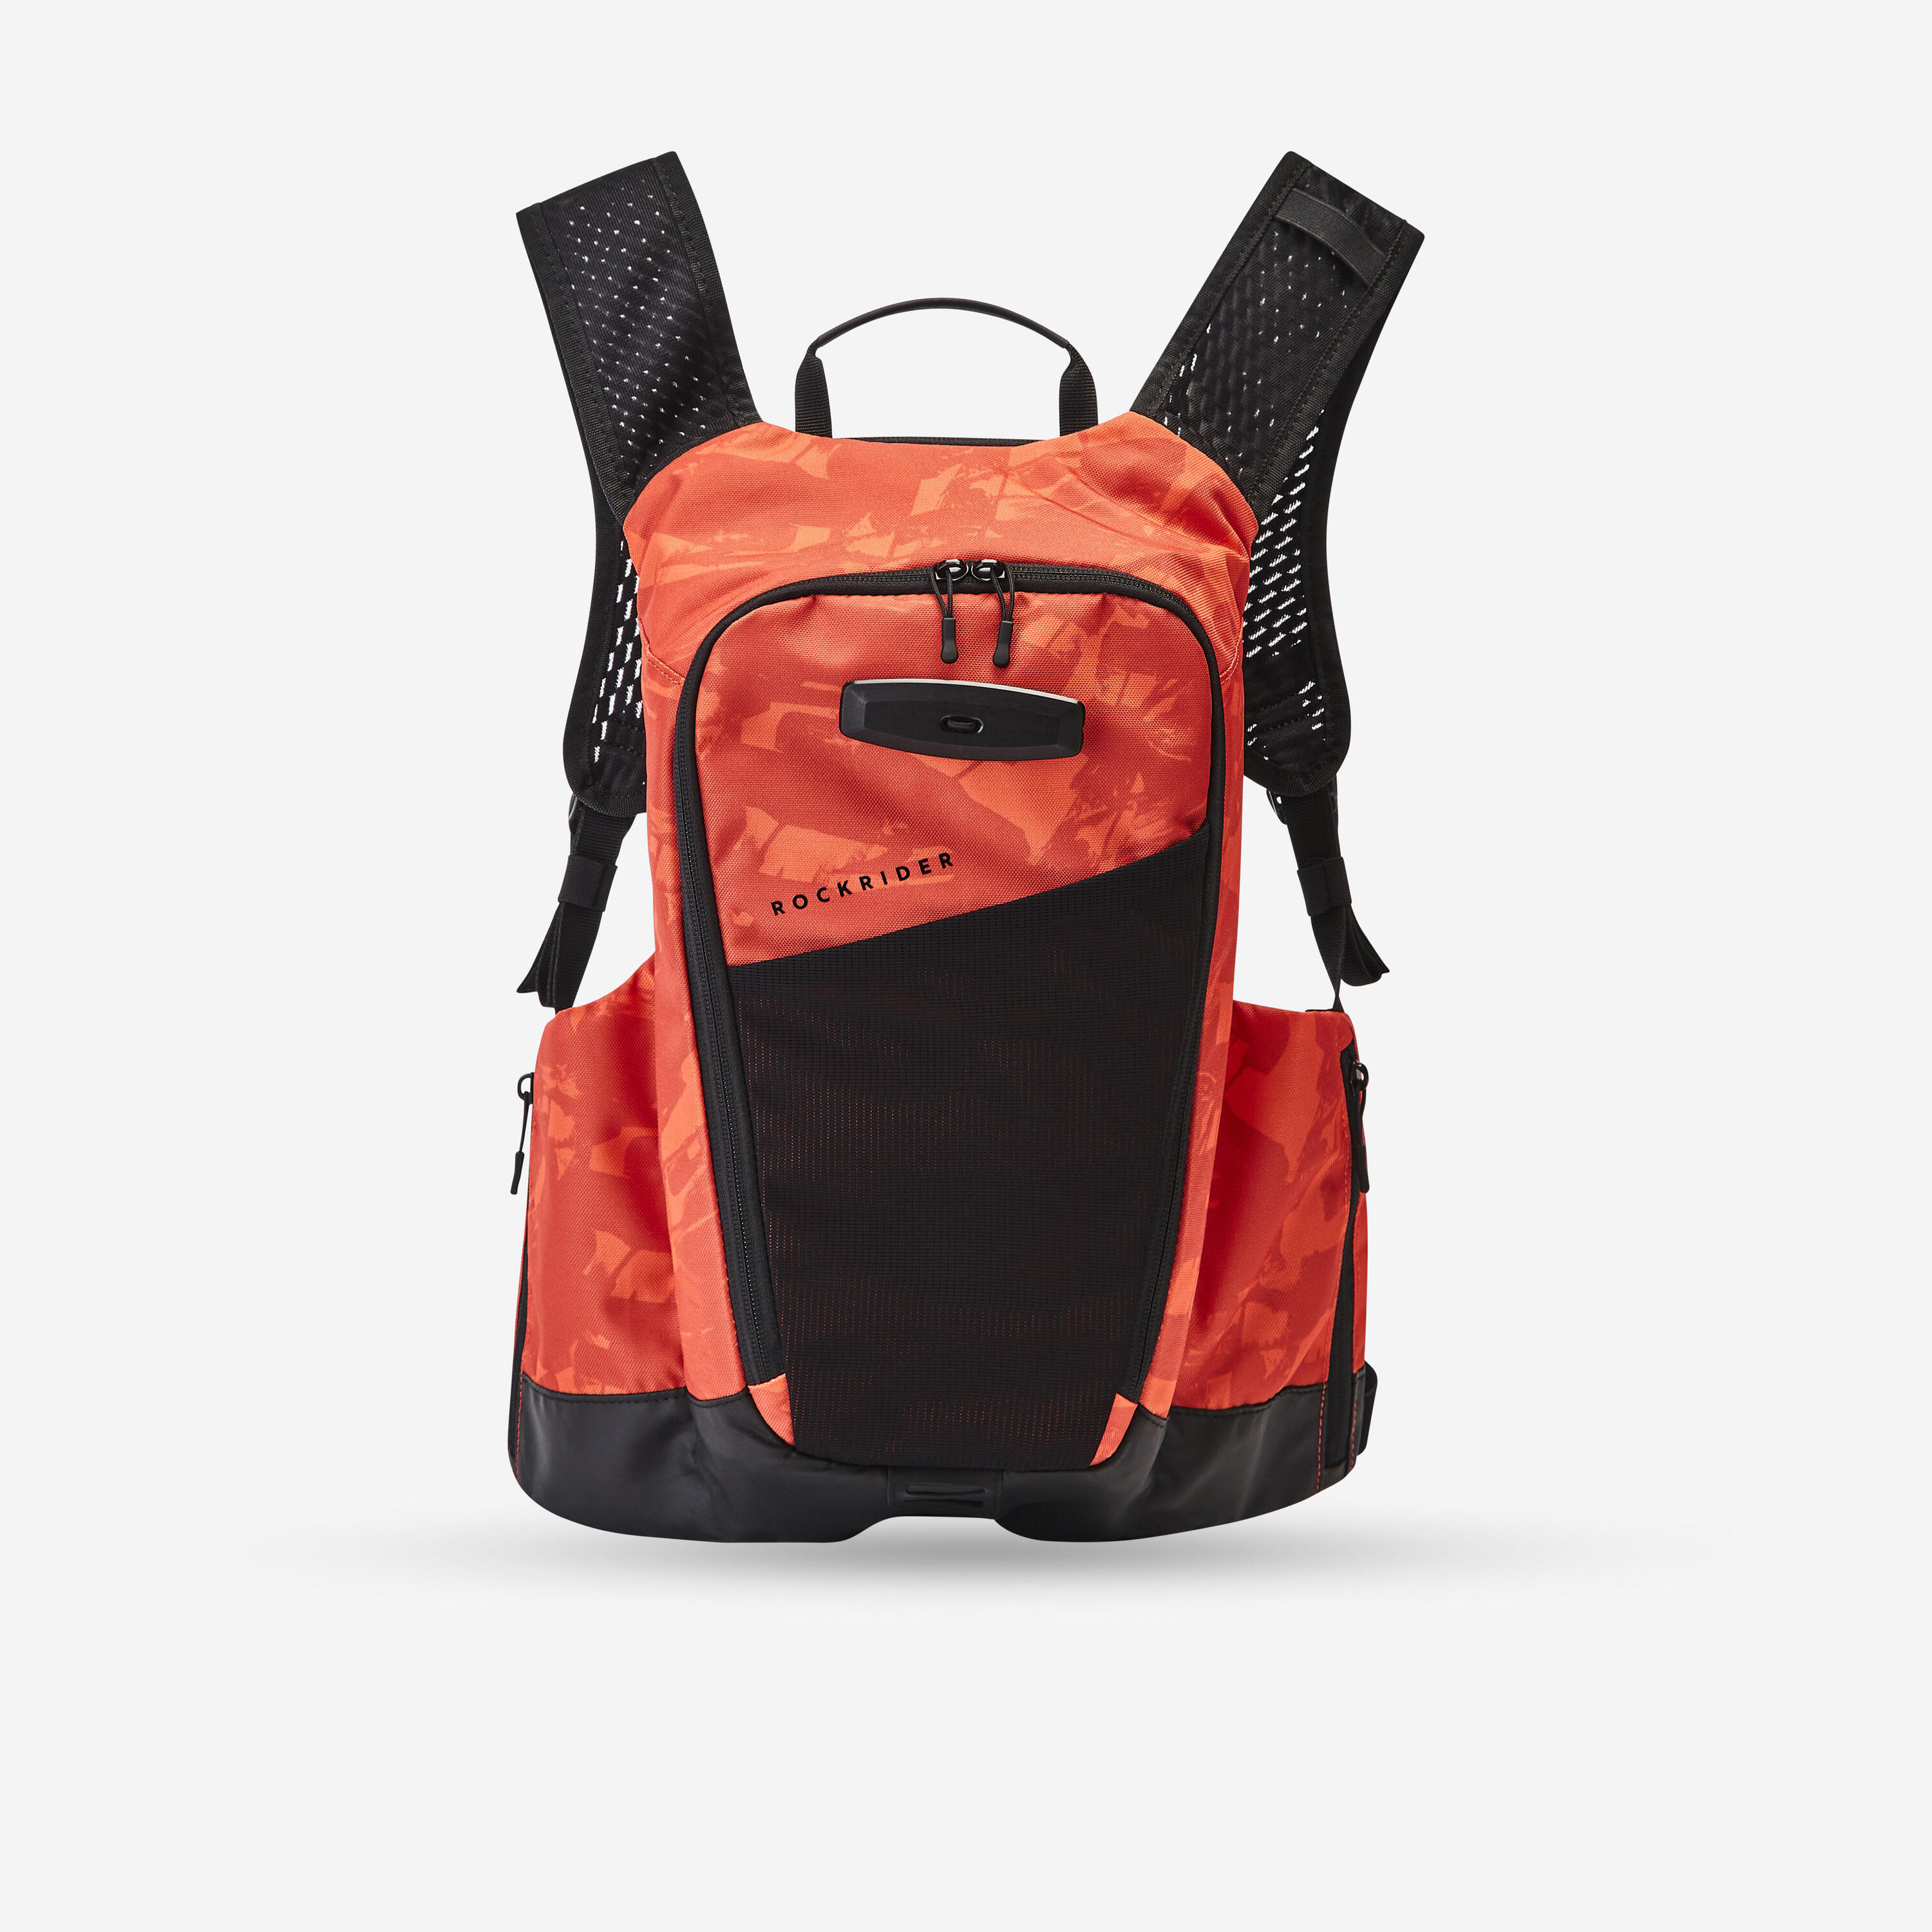 ROCKRIDER Mountain Bike Hydration Backpack Explore 7L/2L Water - Red